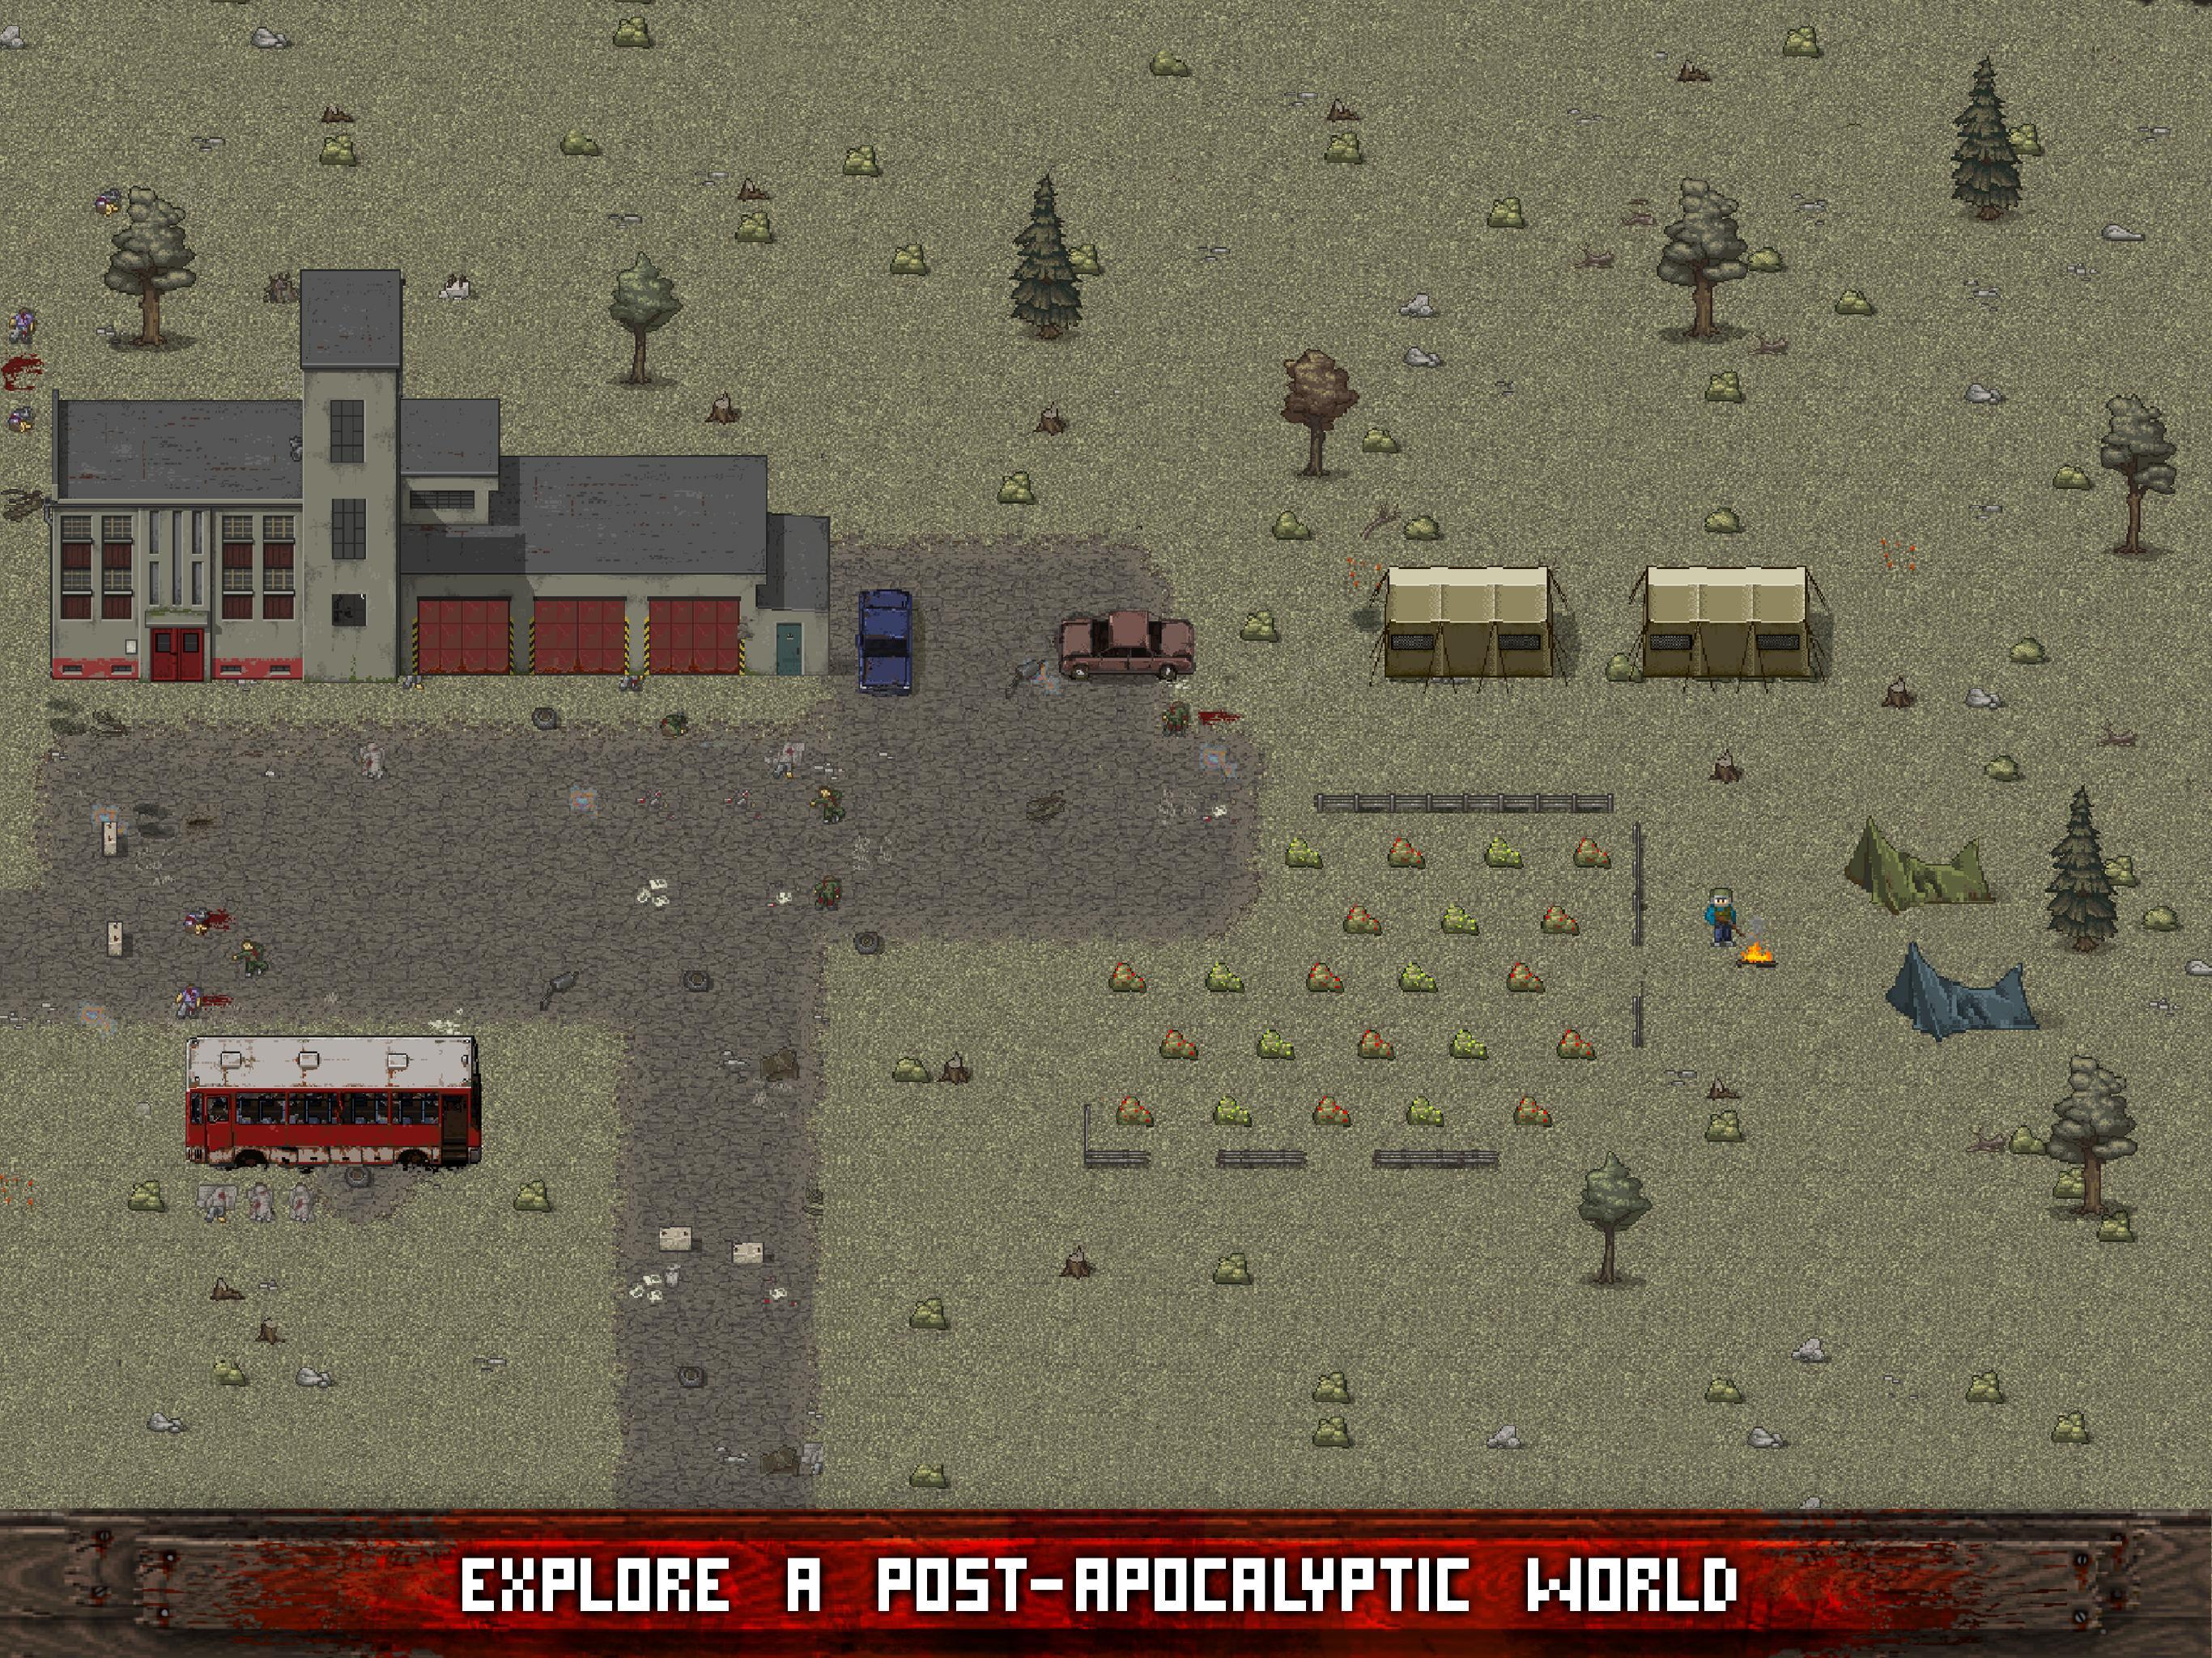 Download DayZ Map android on PC